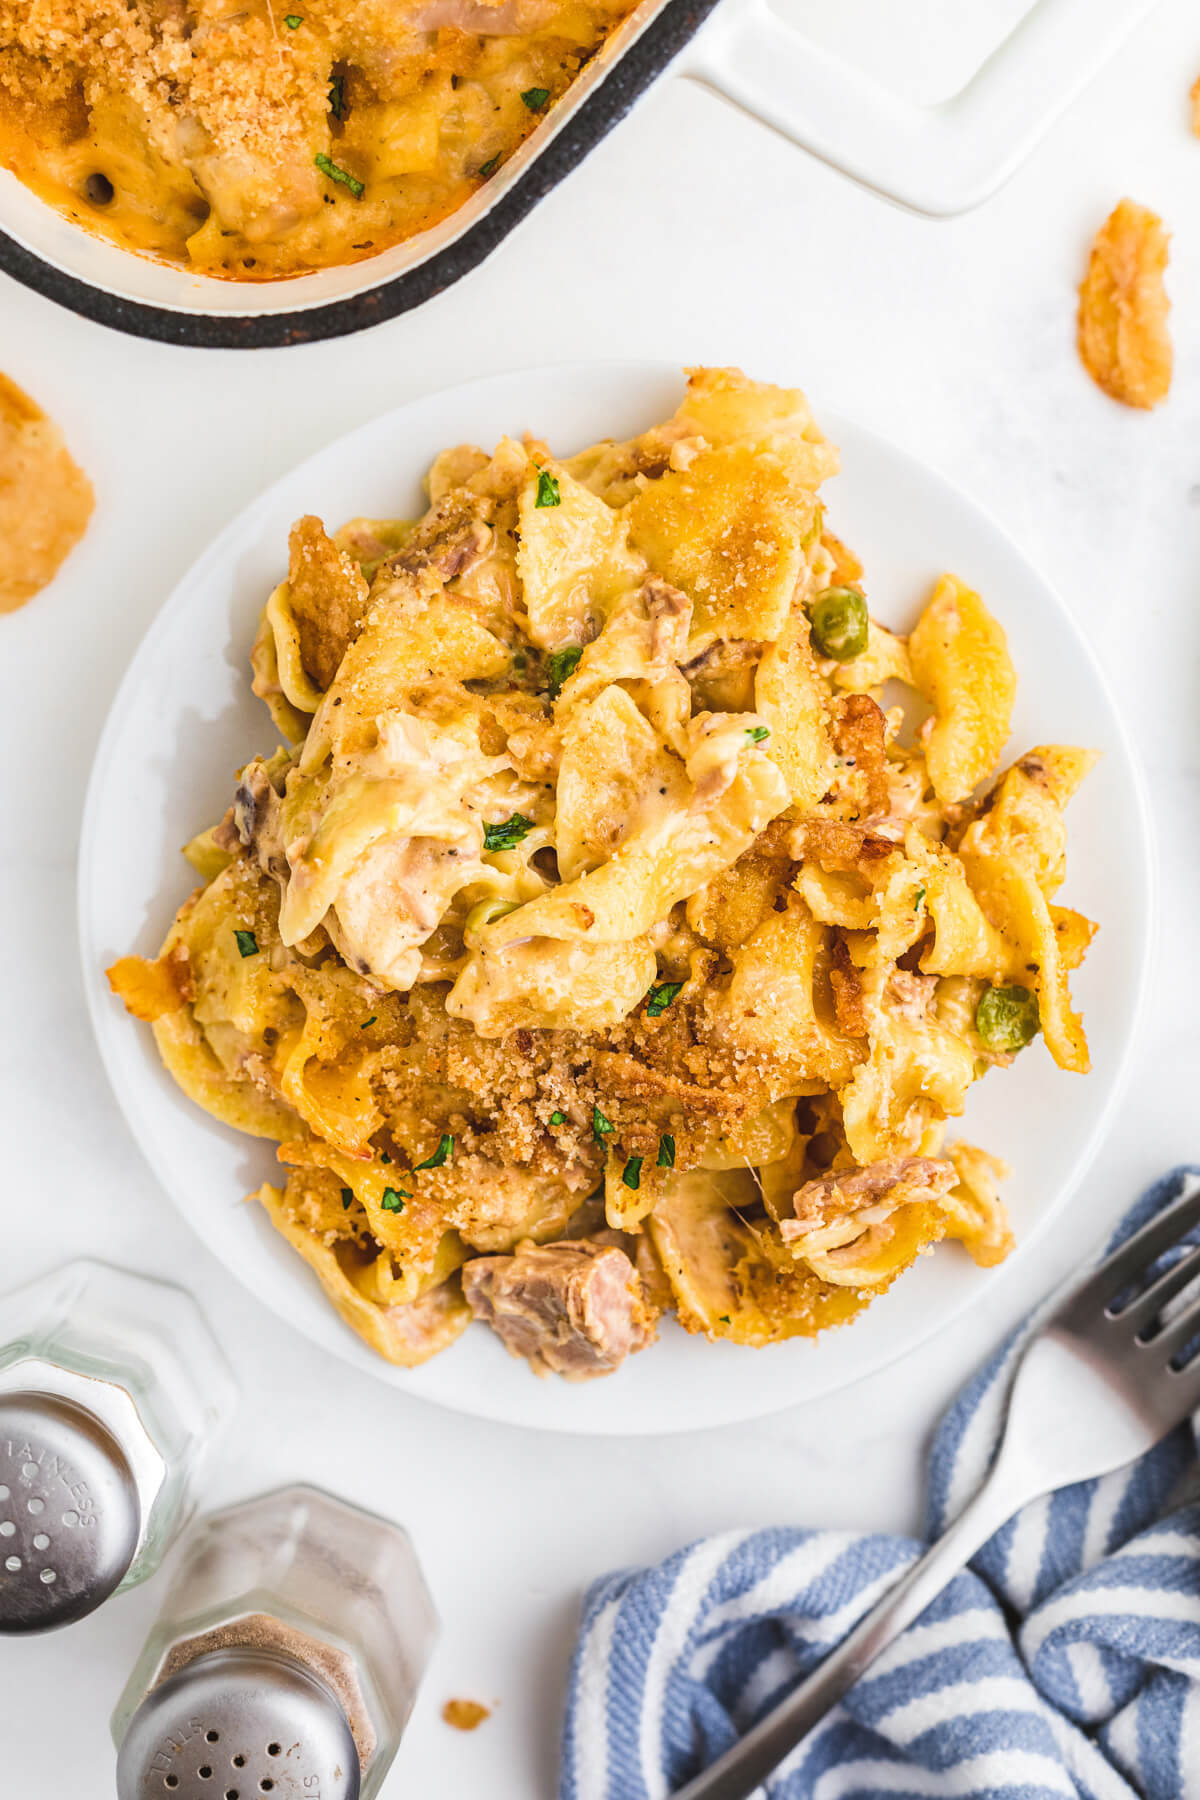 A white dinner plate full of flaked tuna and noodles in a creamy sauce topped with crispy golden bread crumbs.